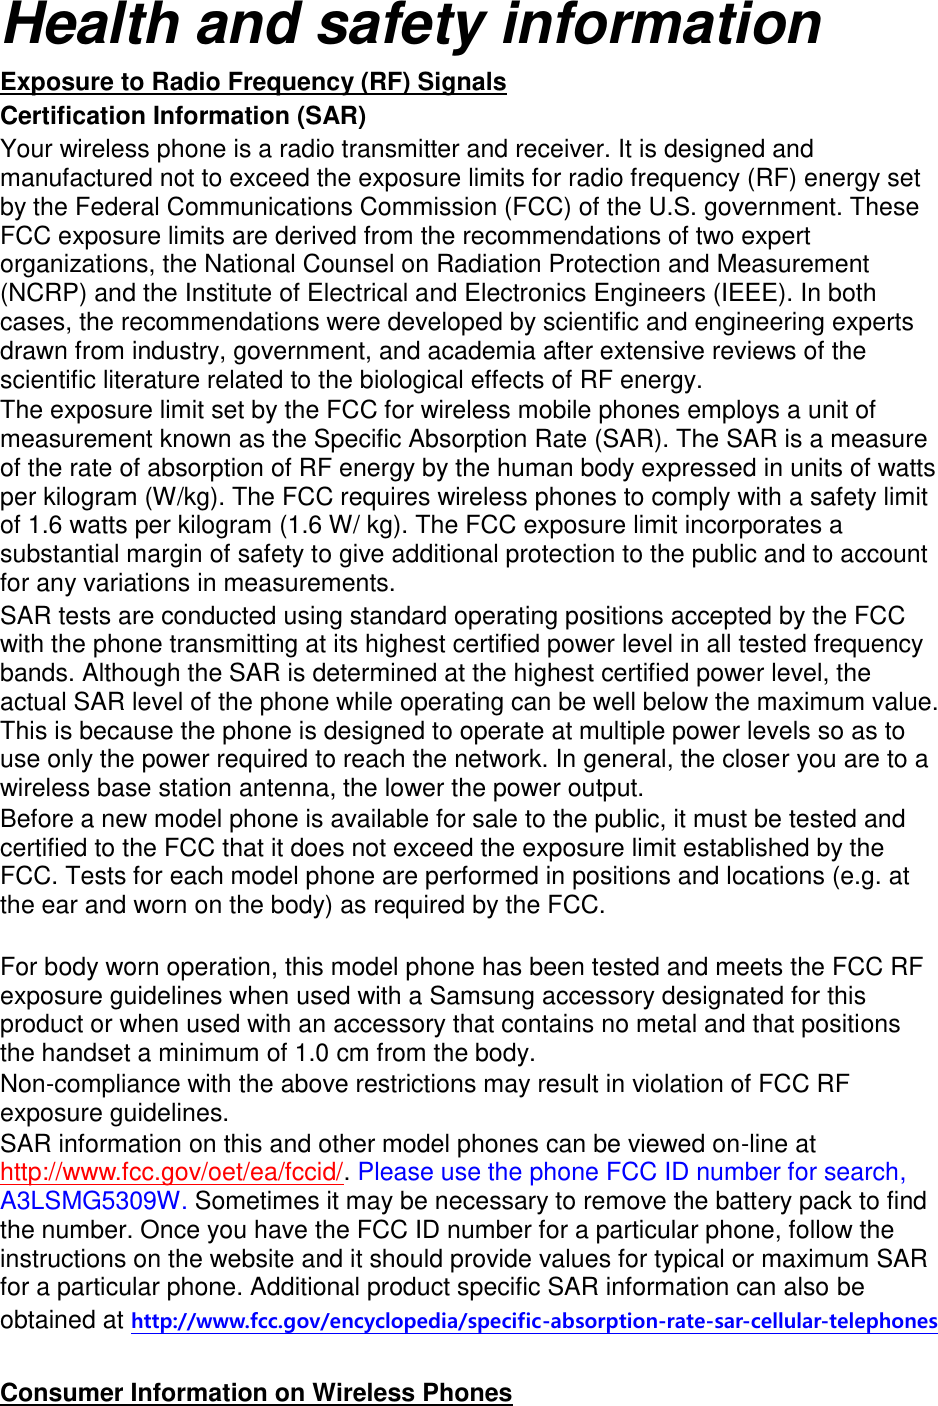 Health and safety information Exposure to Radio Frequency (RF) Signals Certification Information (SAR) Your wireless phone is a radio transmitter and receiver. It is designed and manufactured not to exceed the exposure limits for radio frequency (RF) energy set by the Federal Communications Commission (FCC) of the U.S. government. These FCC exposure limits are derived from the recommendations of two expert organizations, the National Counsel on Radiation Protection and Measurement (NCRP) and the Institute of Electrical and Electronics Engineers (IEEE). In both cases, the recommendations were developed by scientific and engineering experts drawn from industry, government, and academia after extensive reviews of the scientific literature related to the biological effects of RF energy. The exposure limit set by the FCC for wireless mobile phones employs a unit of measurement known as the Specific Absorption Rate (SAR). The SAR is a measure of the rate of absorption of RF energy by the human body expressed in units of watts per kilogram (W/kg). The FCC requires wireless phones to comply with a safety limit of 1.6 watts per kilogram (1.6 W/ kg). The FCC exposure limit incorporates a substantial margin of safety to give additional protection to the public and to account for any variations in measurements. SAR tests are conducted using standard operating positions accepted by the FCC with the phone transmitting at its highest certified power level in all tested frequency bands. Although the SAR is determined at the highest certified power level, the actual SAR level of the phone while operating can be well below the maximum value. This is because the phone is designed to operate at multiple power levels so as to use only the power required to reach the network. In general, the closer you are to a wireless base station antenna, the lower the power output. Before a new model phone is available for sale to the public, it must be tested and certified to the FCC that it does not exceed the exposure limit established by the FCC. Tests for each model phone are performed in positions and locations (e.g. at the ear and worn on the body) as required by the FCC.      For body worn operation, this model phone has been tested and meets the FCC RF exposure guidelines when used with a Samsung accessory designated for this product or when used with an accessory that contains no metal and that positions the handset a minimum of 1.0 cm from the body.   Non-compliance with the above restrictions may result in violation of FCC RF exposure guidelines. SAR information on this and other model phones can be viewed on-line at http://www.fcc.gov/oet/ea/fccid/. Please use the phone FCC ID number for search, A3LSMG5309W. Sometimes it may be necessary to remove the battery pack to find the number. Once you have the FCC ID number for a particular phone, follow the instructions on the website and it should provide values for typical or maximum SAR for a particular phone. Additional product specific SAR information can also be obtained at http://www.fcc.gov/encyclopedia/specific-absorption-rate-sar-cellular-telephones  Consumer Information on Wireless Phones 